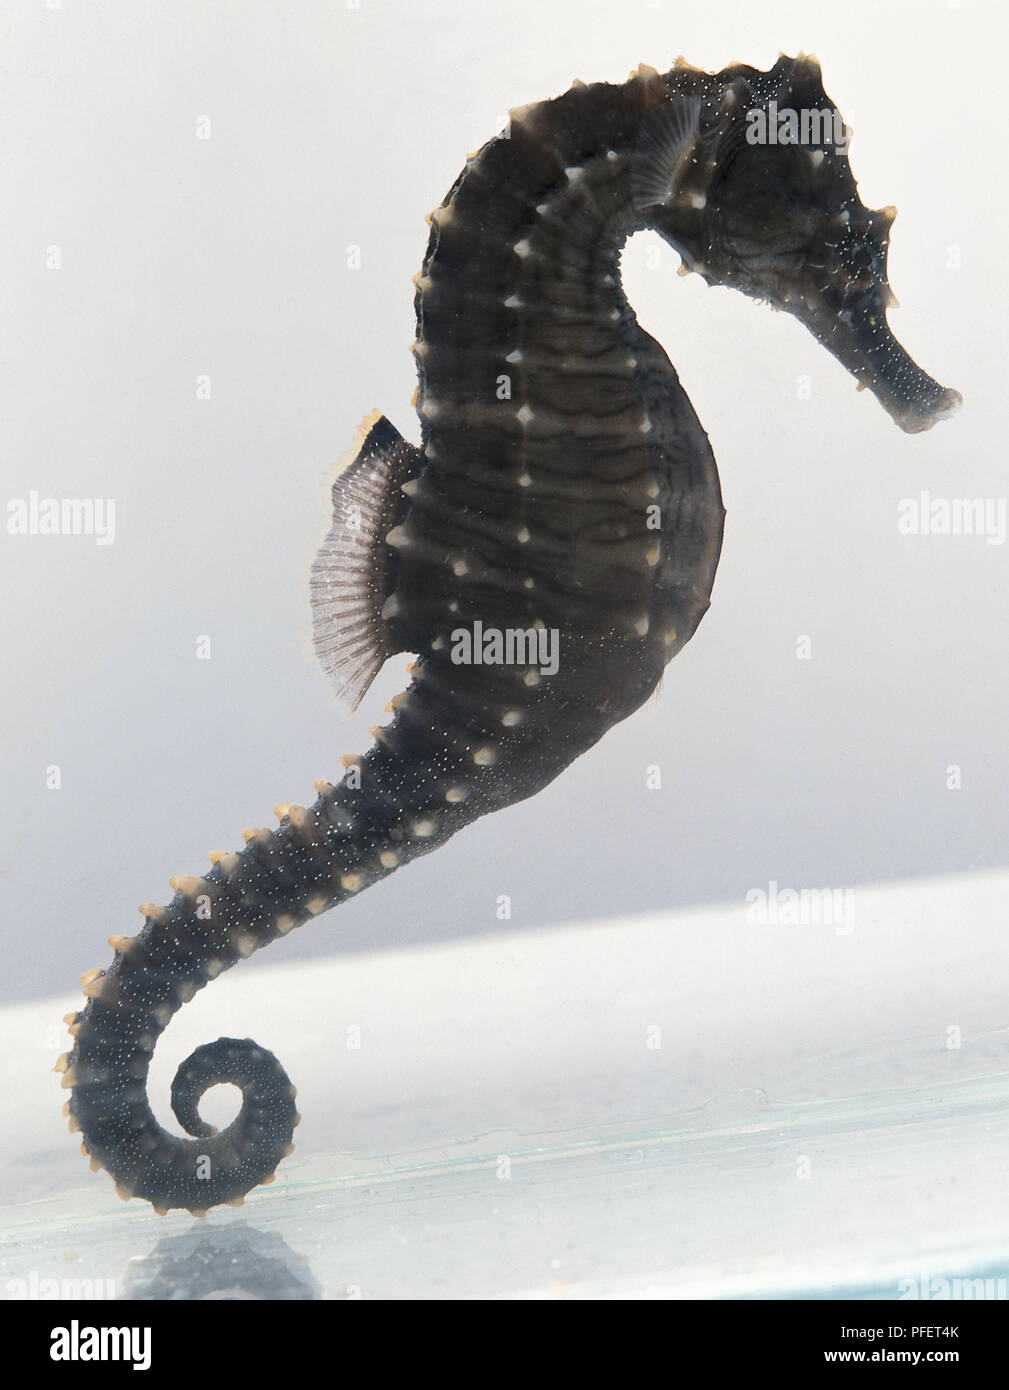 Sea horse - side view Stock Photo